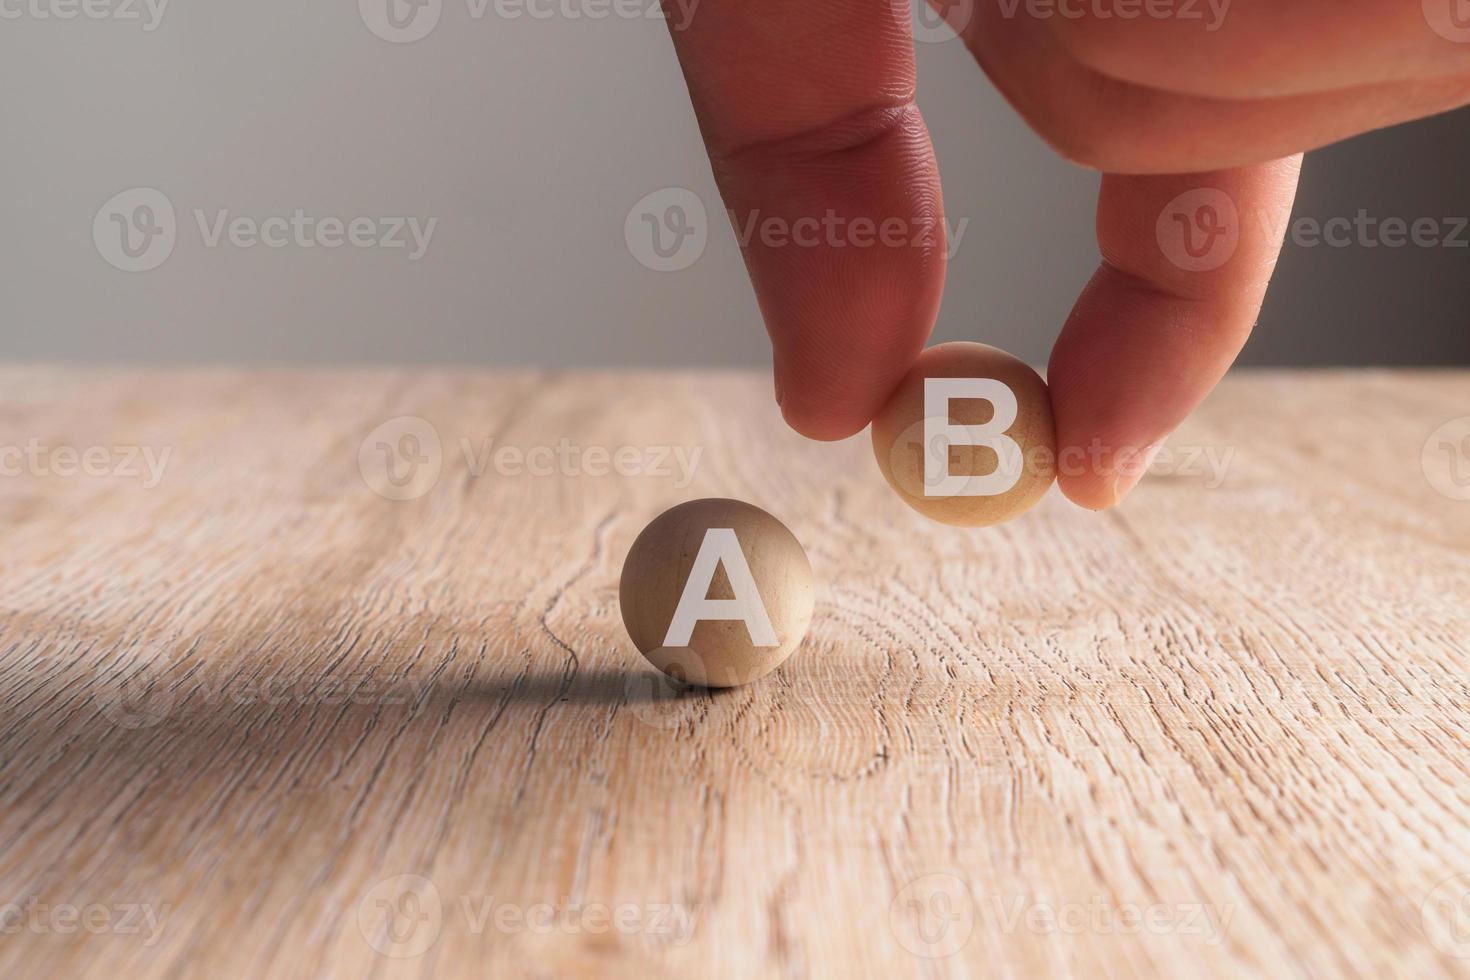 Hand putting on A-B word written in wooden ball photo